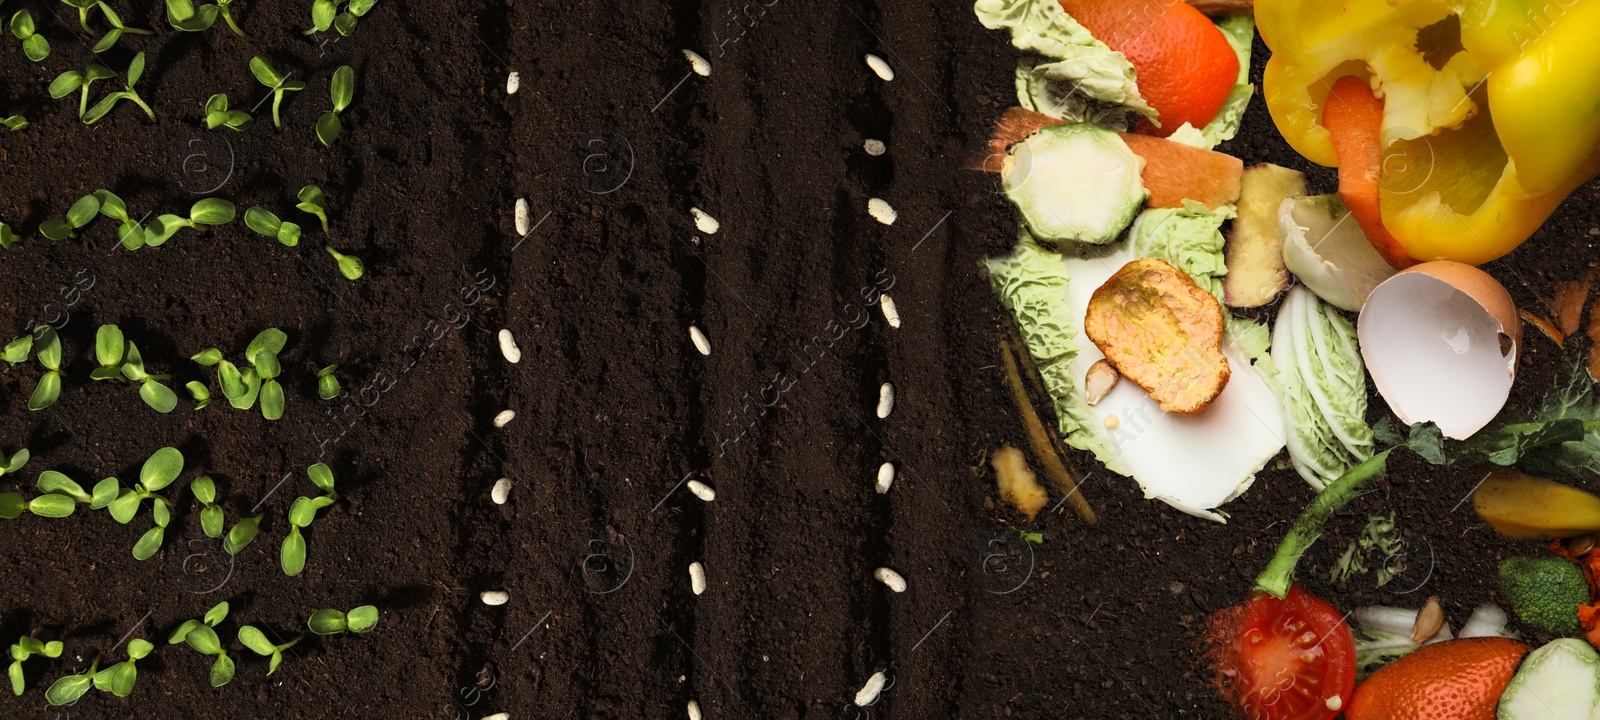 Image of Organic waste for composting and white beans on soil, flat lay. Natural fertilizer